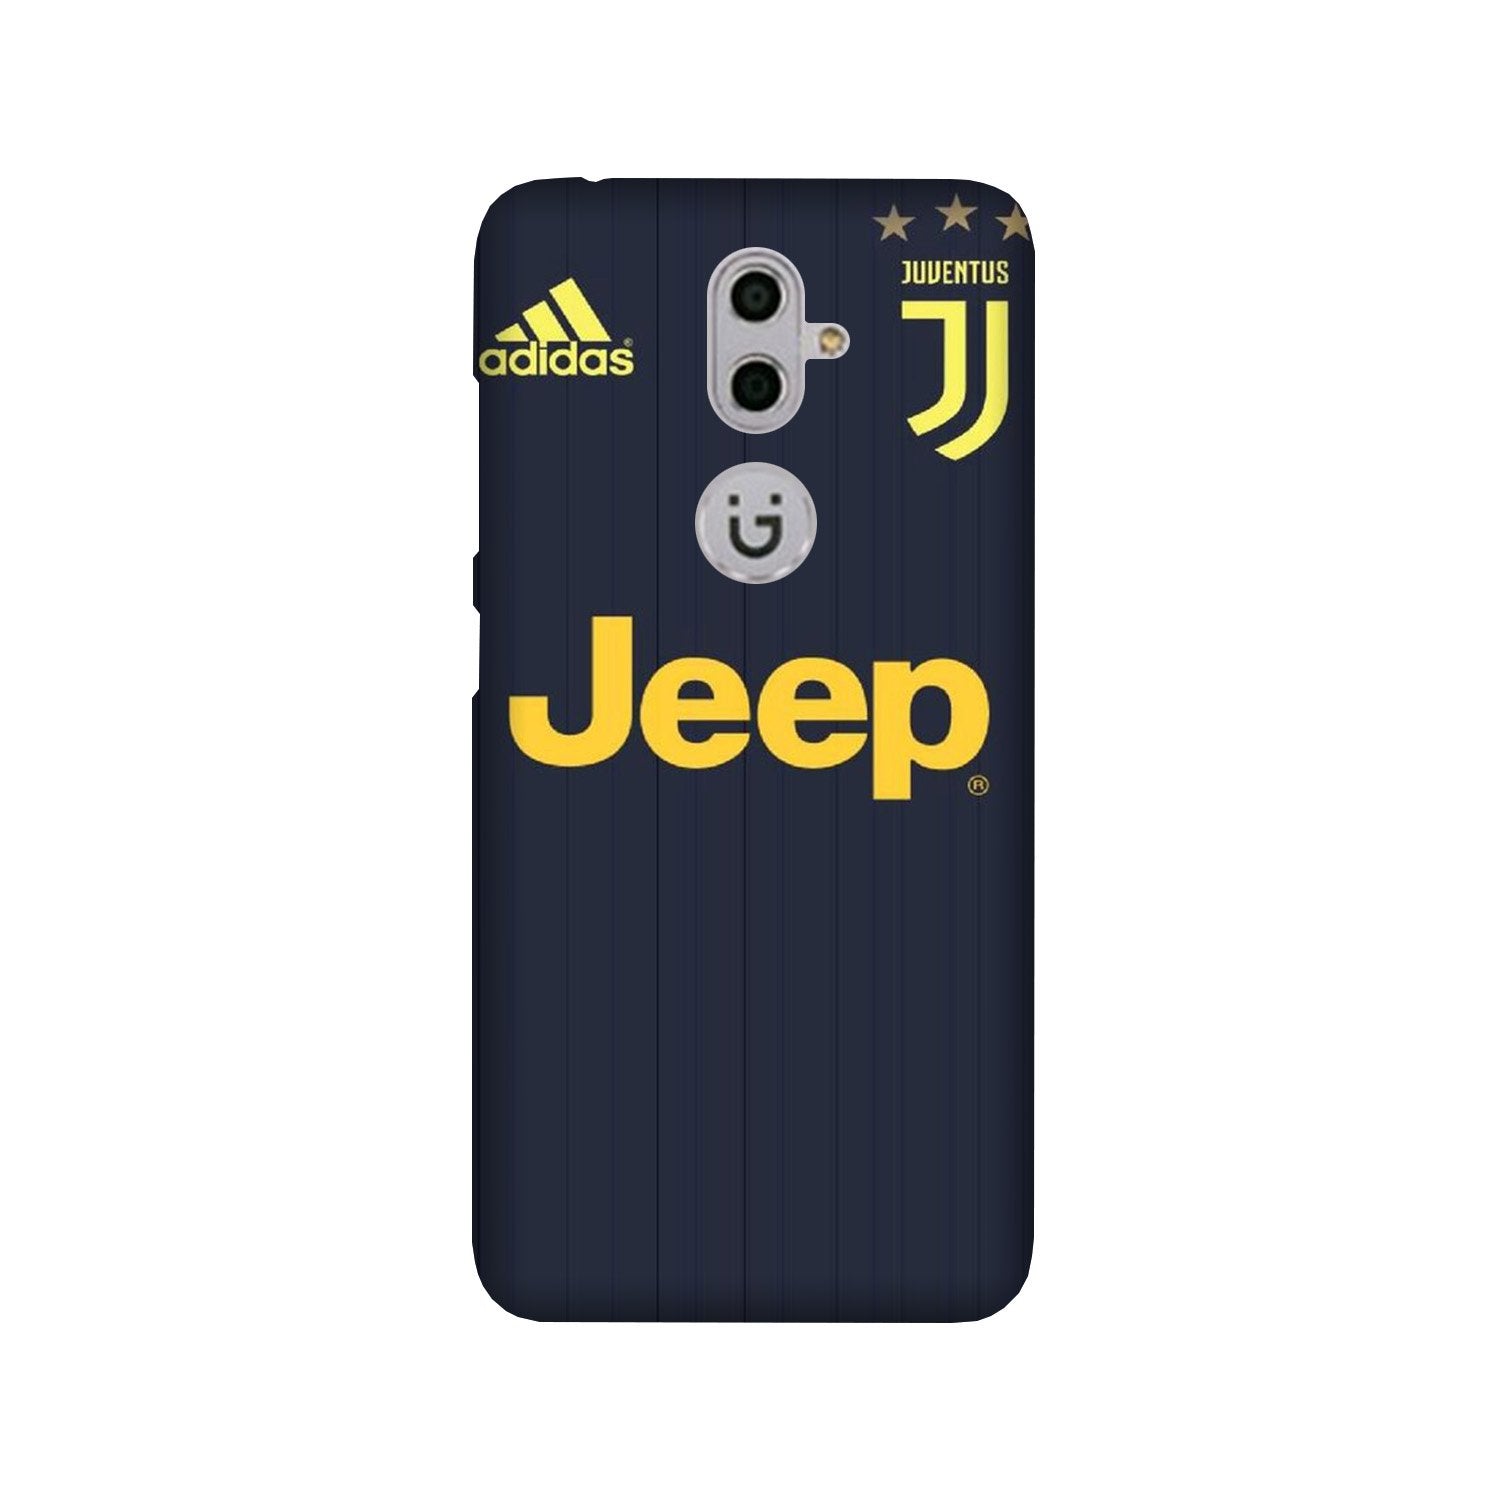 Jeep Juventus Case for Gionee S9(Design - 161)